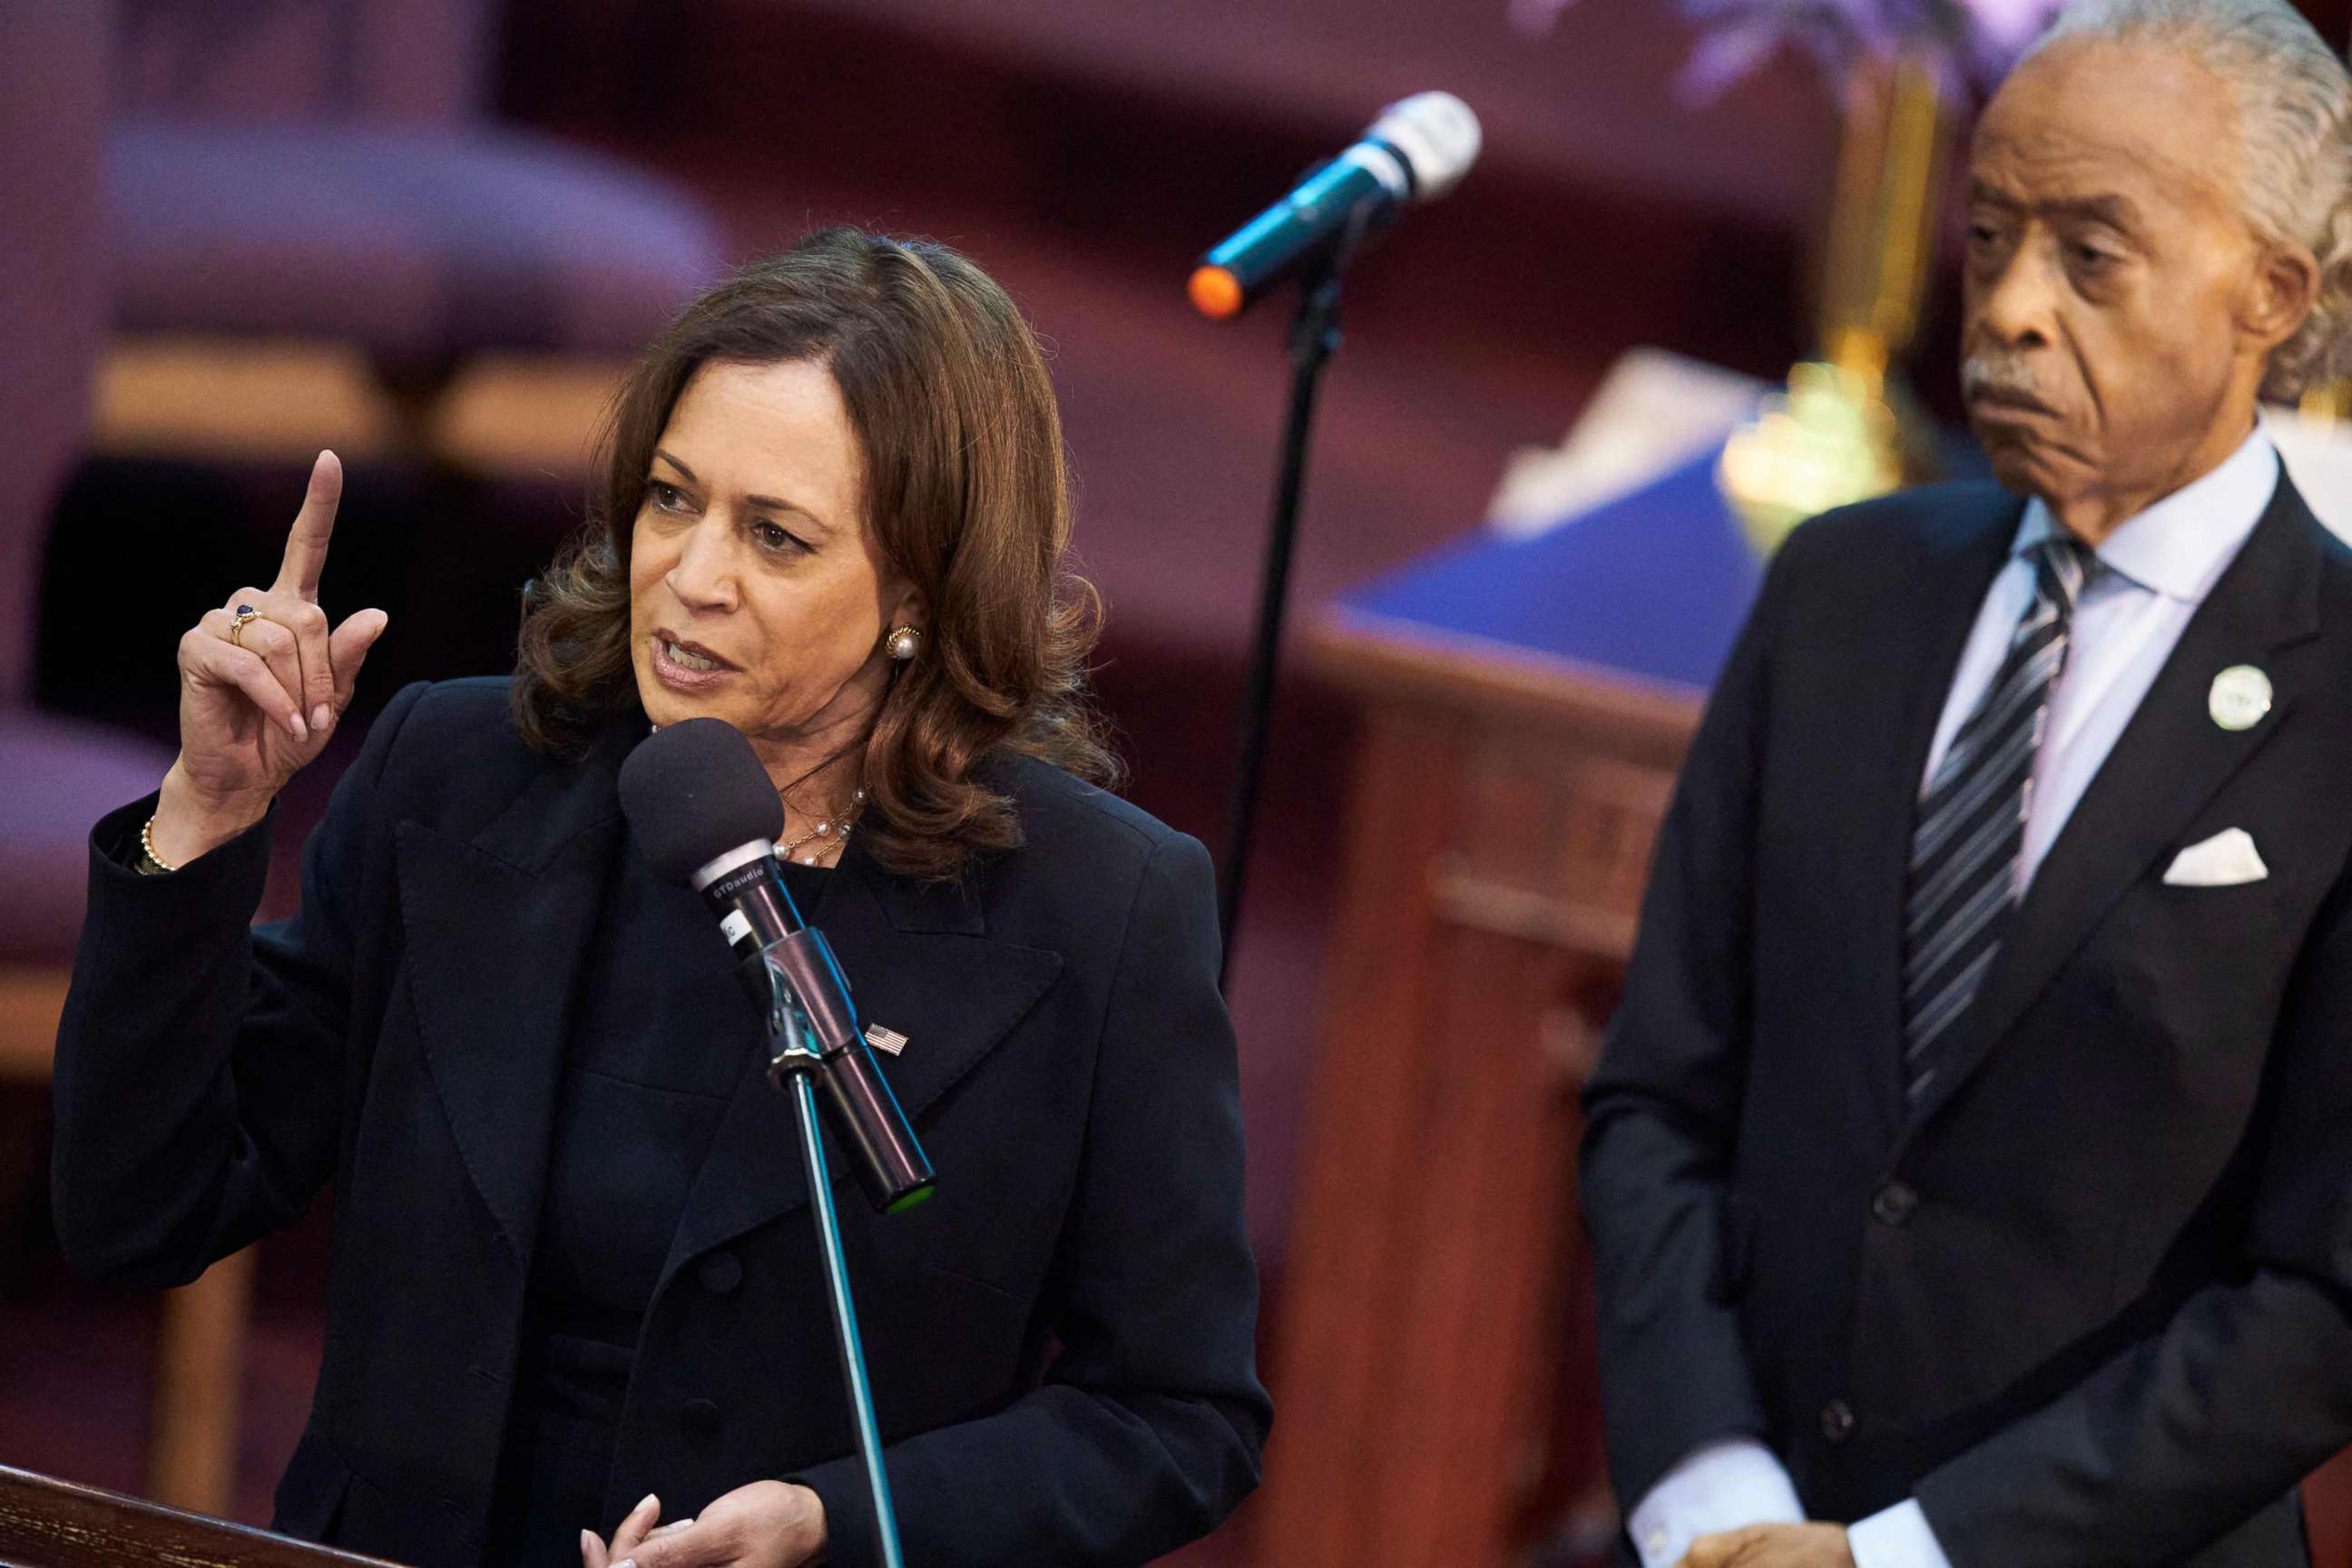 PHOTO: Vice President Kamala Harris, with the Reverend Al Sharpton at right, speaks at the funeral service for Ruth Whitfield in Mount Olive Baptist Church in Buffalo, New York, on May 28, 2022.